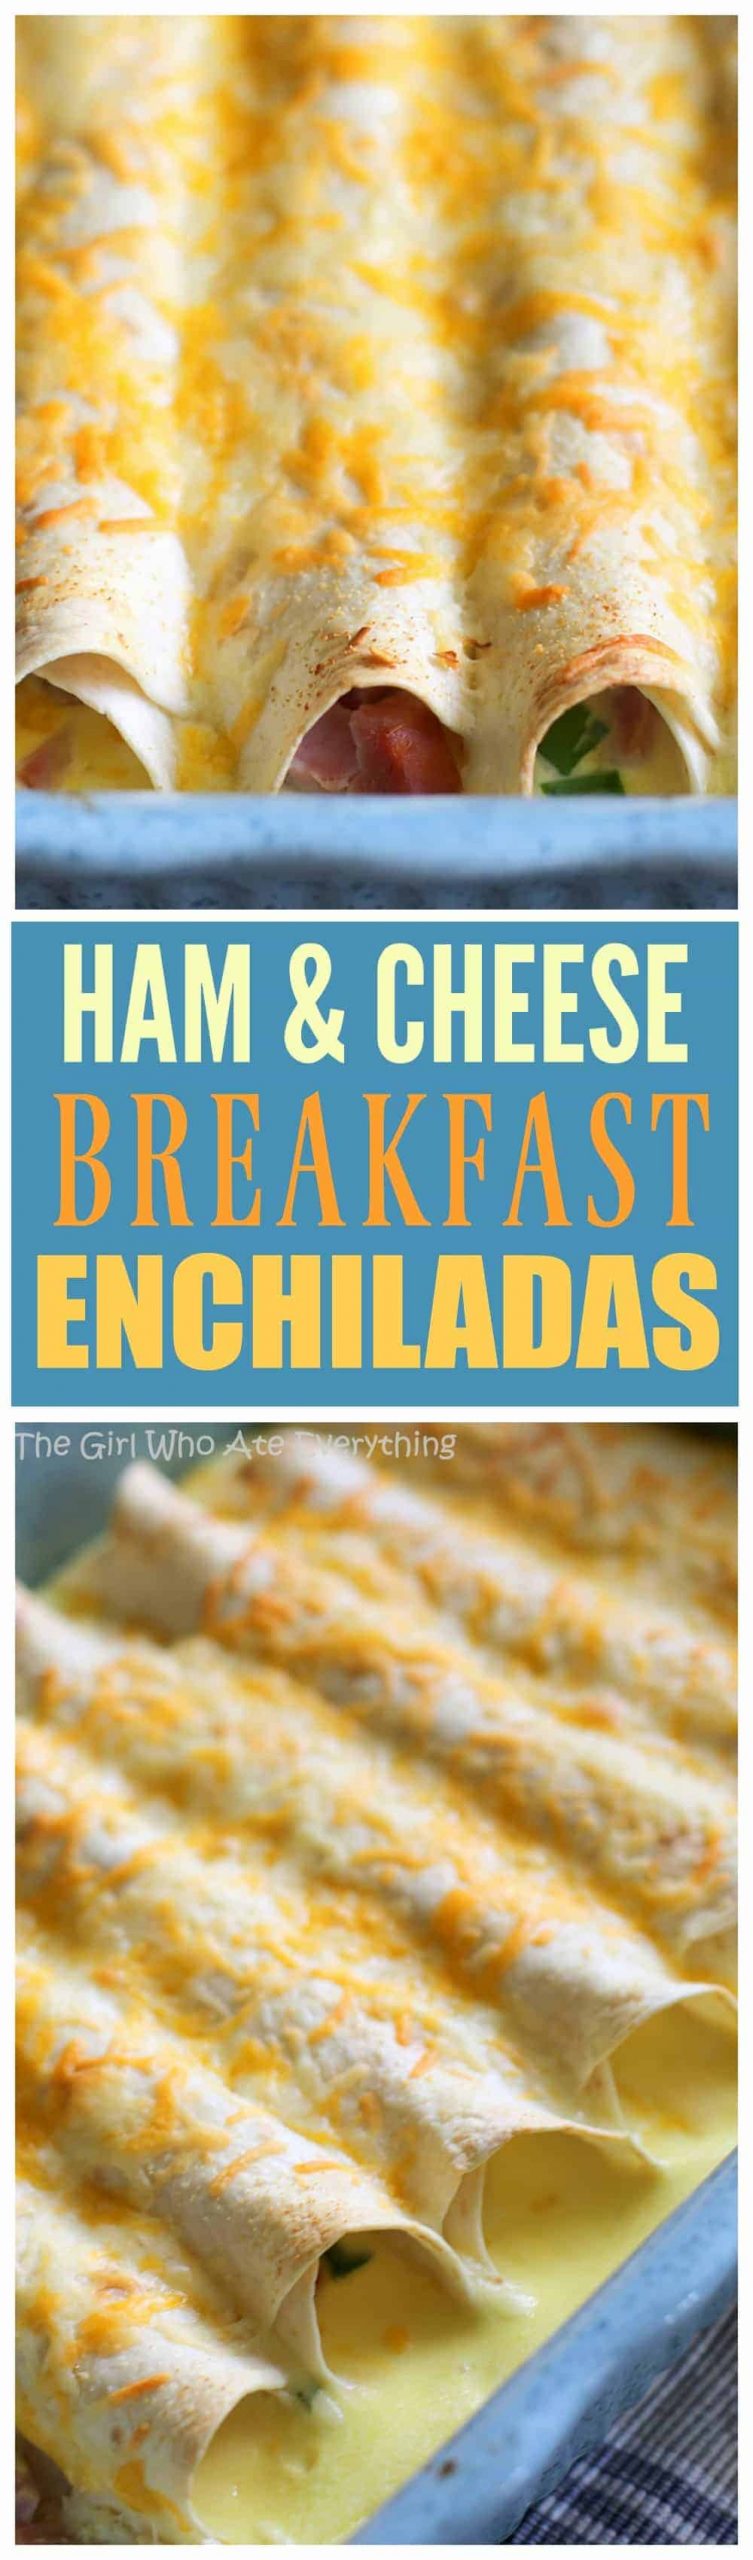 Ham and Cheese Breakfast Enchiladas - great for entertaining! the-girl-who-ate-everything.com